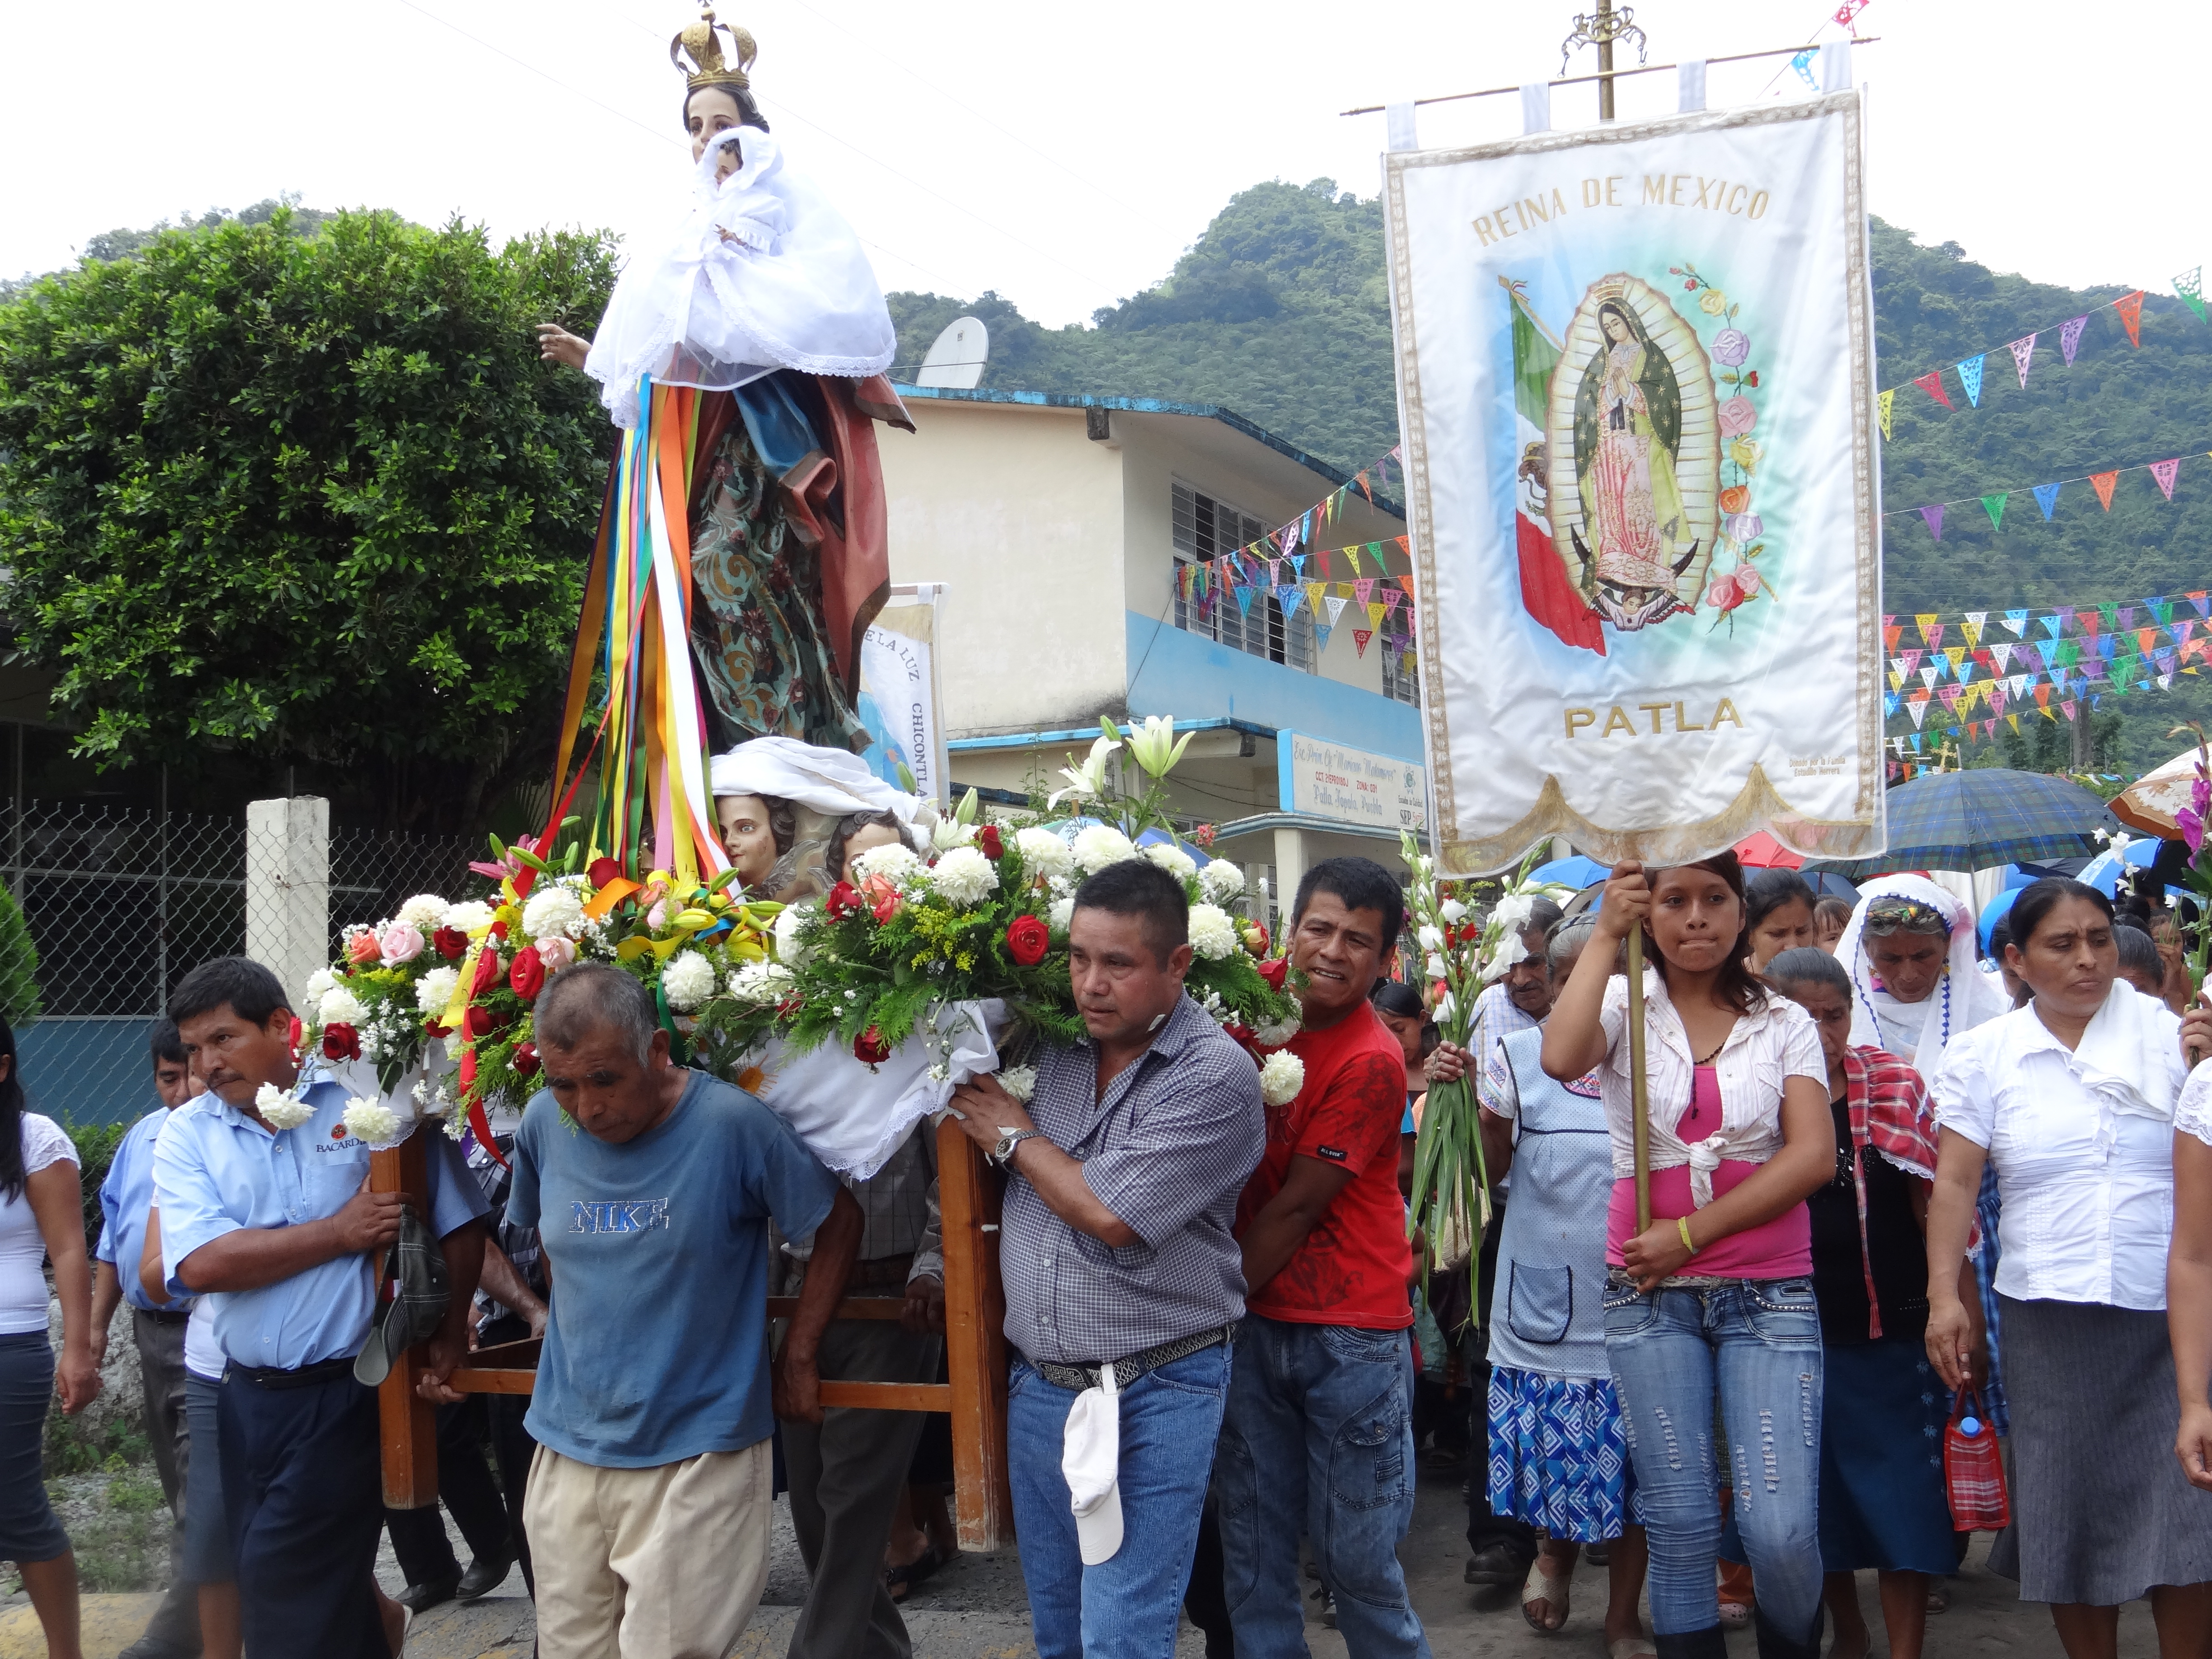 Members of various Totonac communities gathered for La Procession, and carried the statue of the Virgin Mary around the village. Patla festival 2012